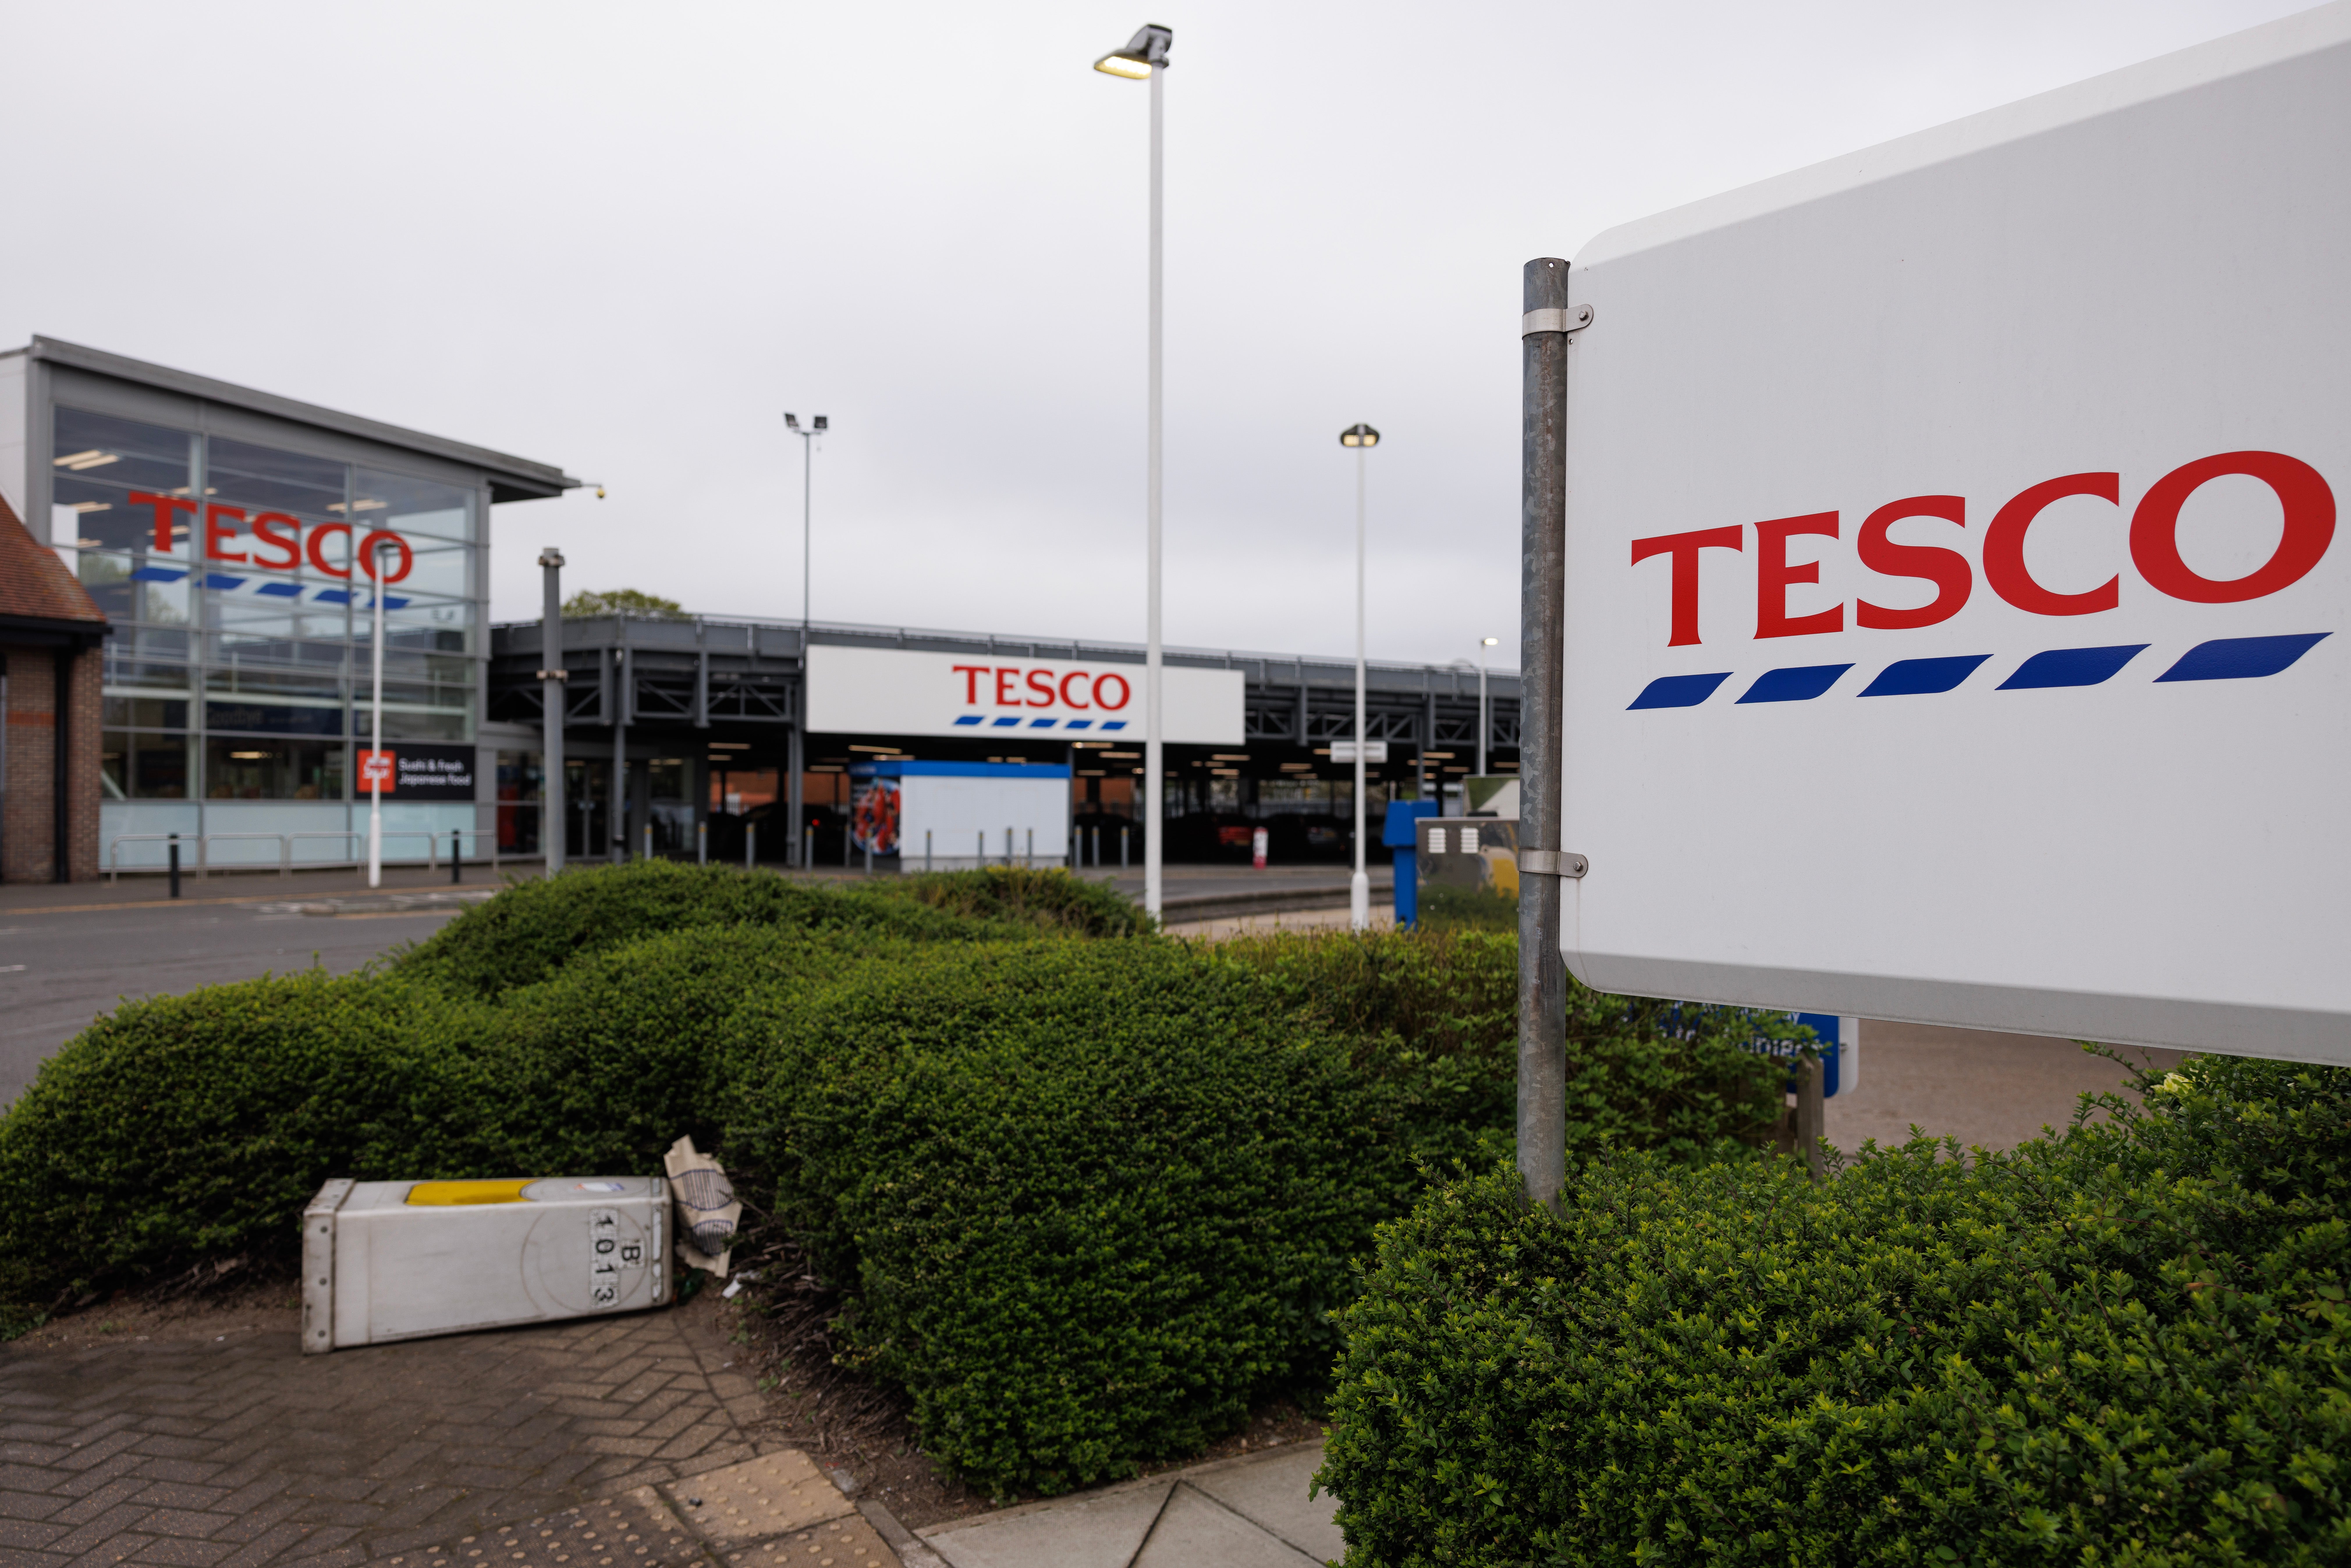 The altercation took place outside a Tesco in Bournemouth